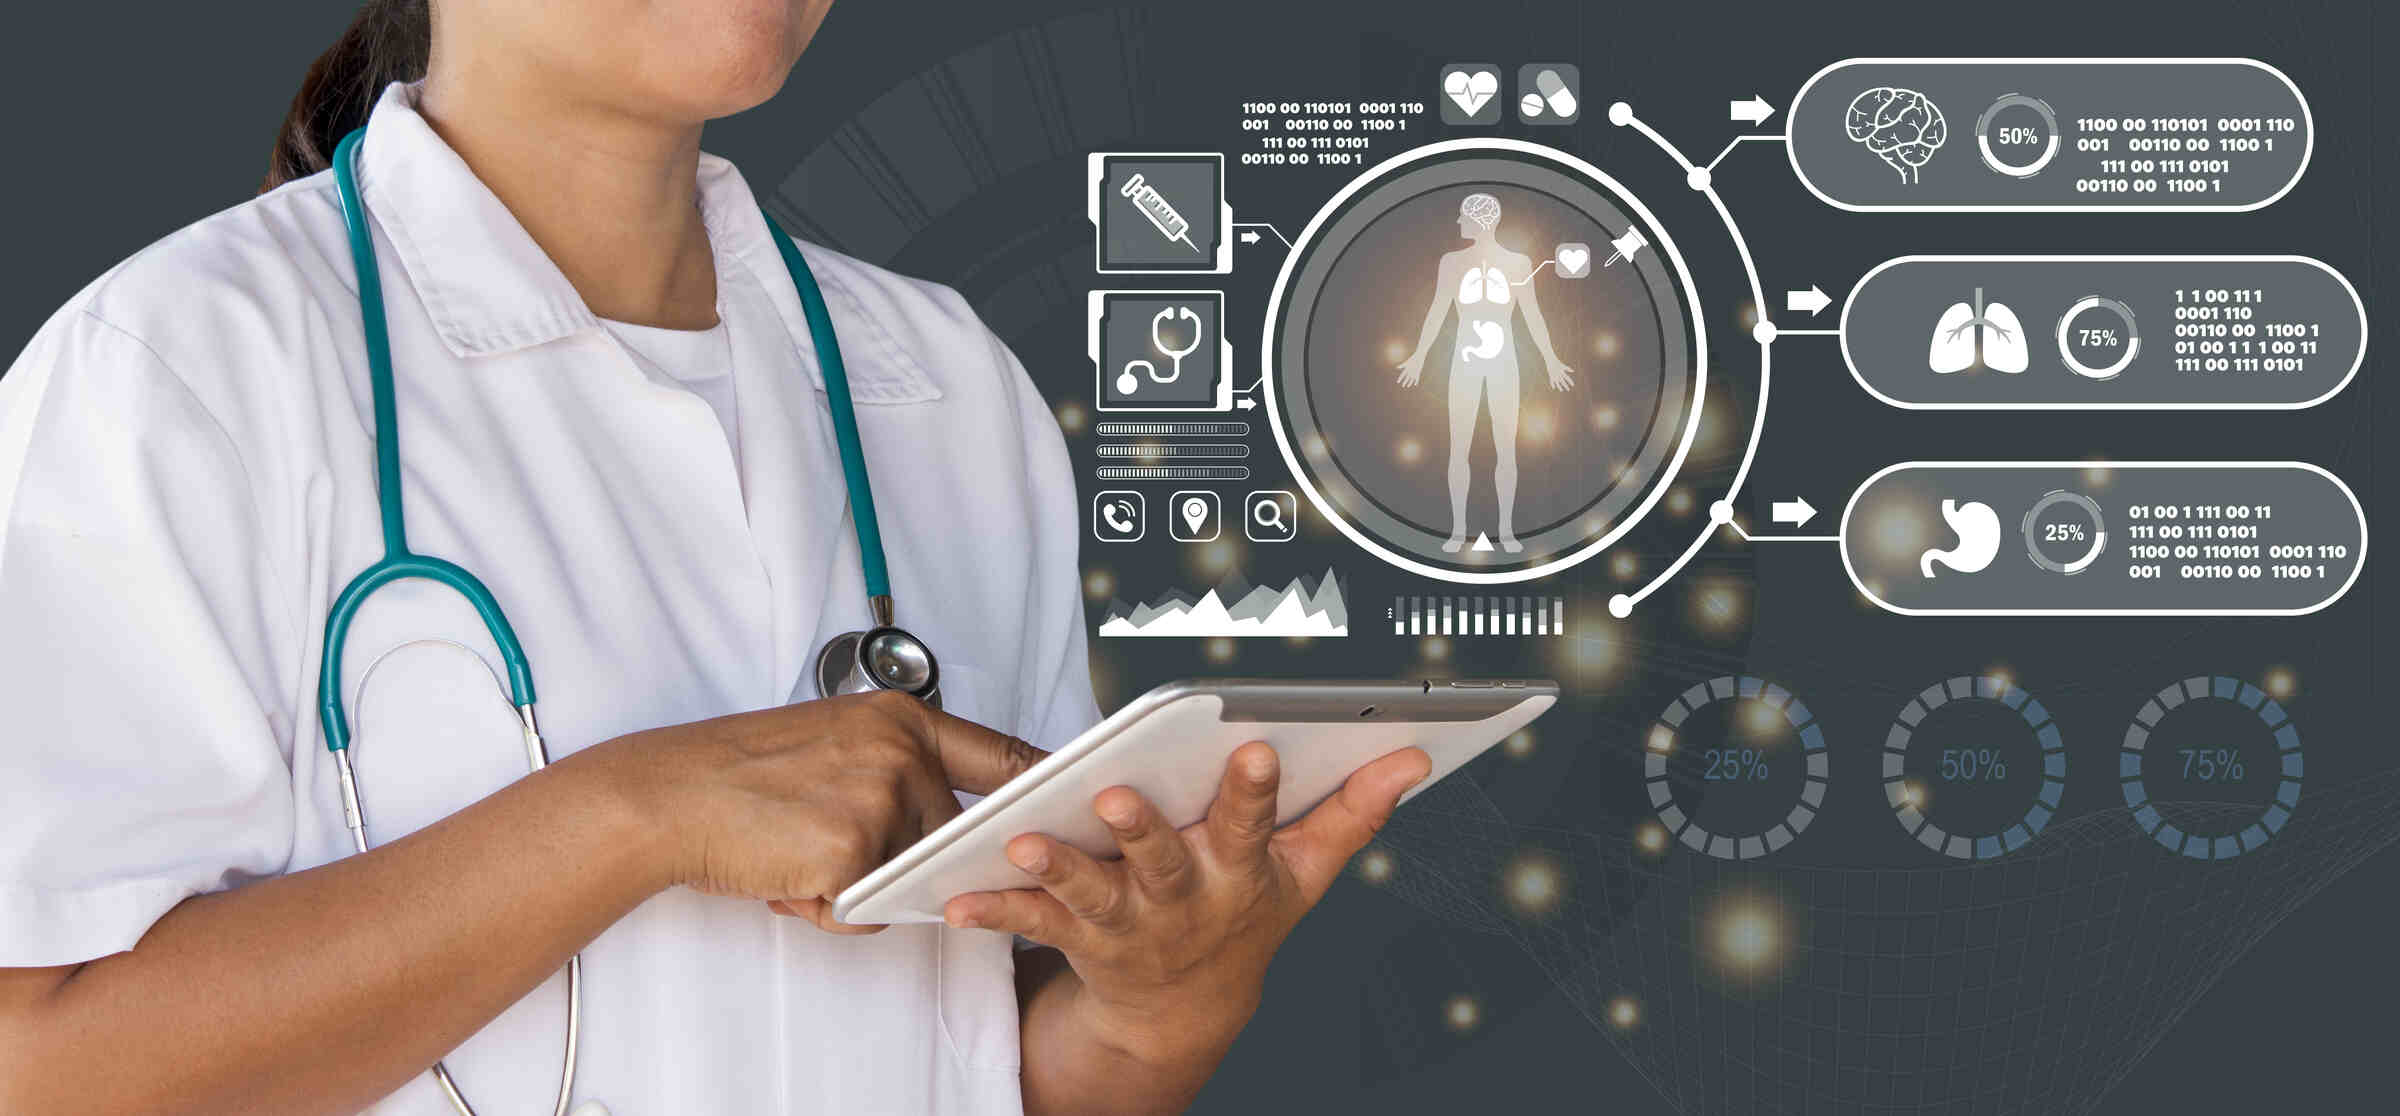 The Role of Application Management in Supporting Healthcare Digital Transformation